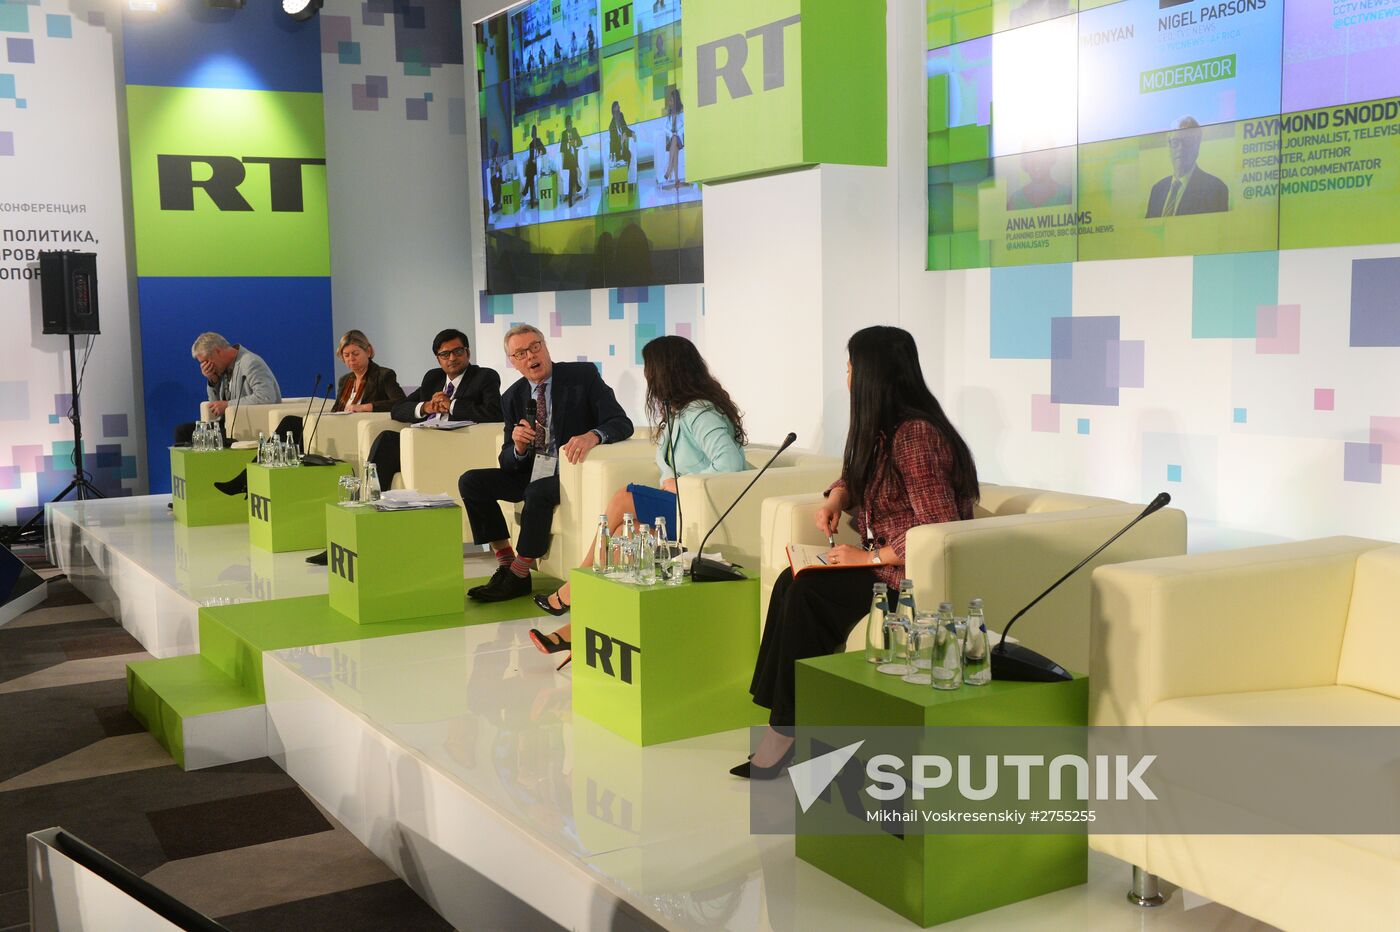 RT Conference "Information, messages, politics: The shape-shifting powers of today's world"